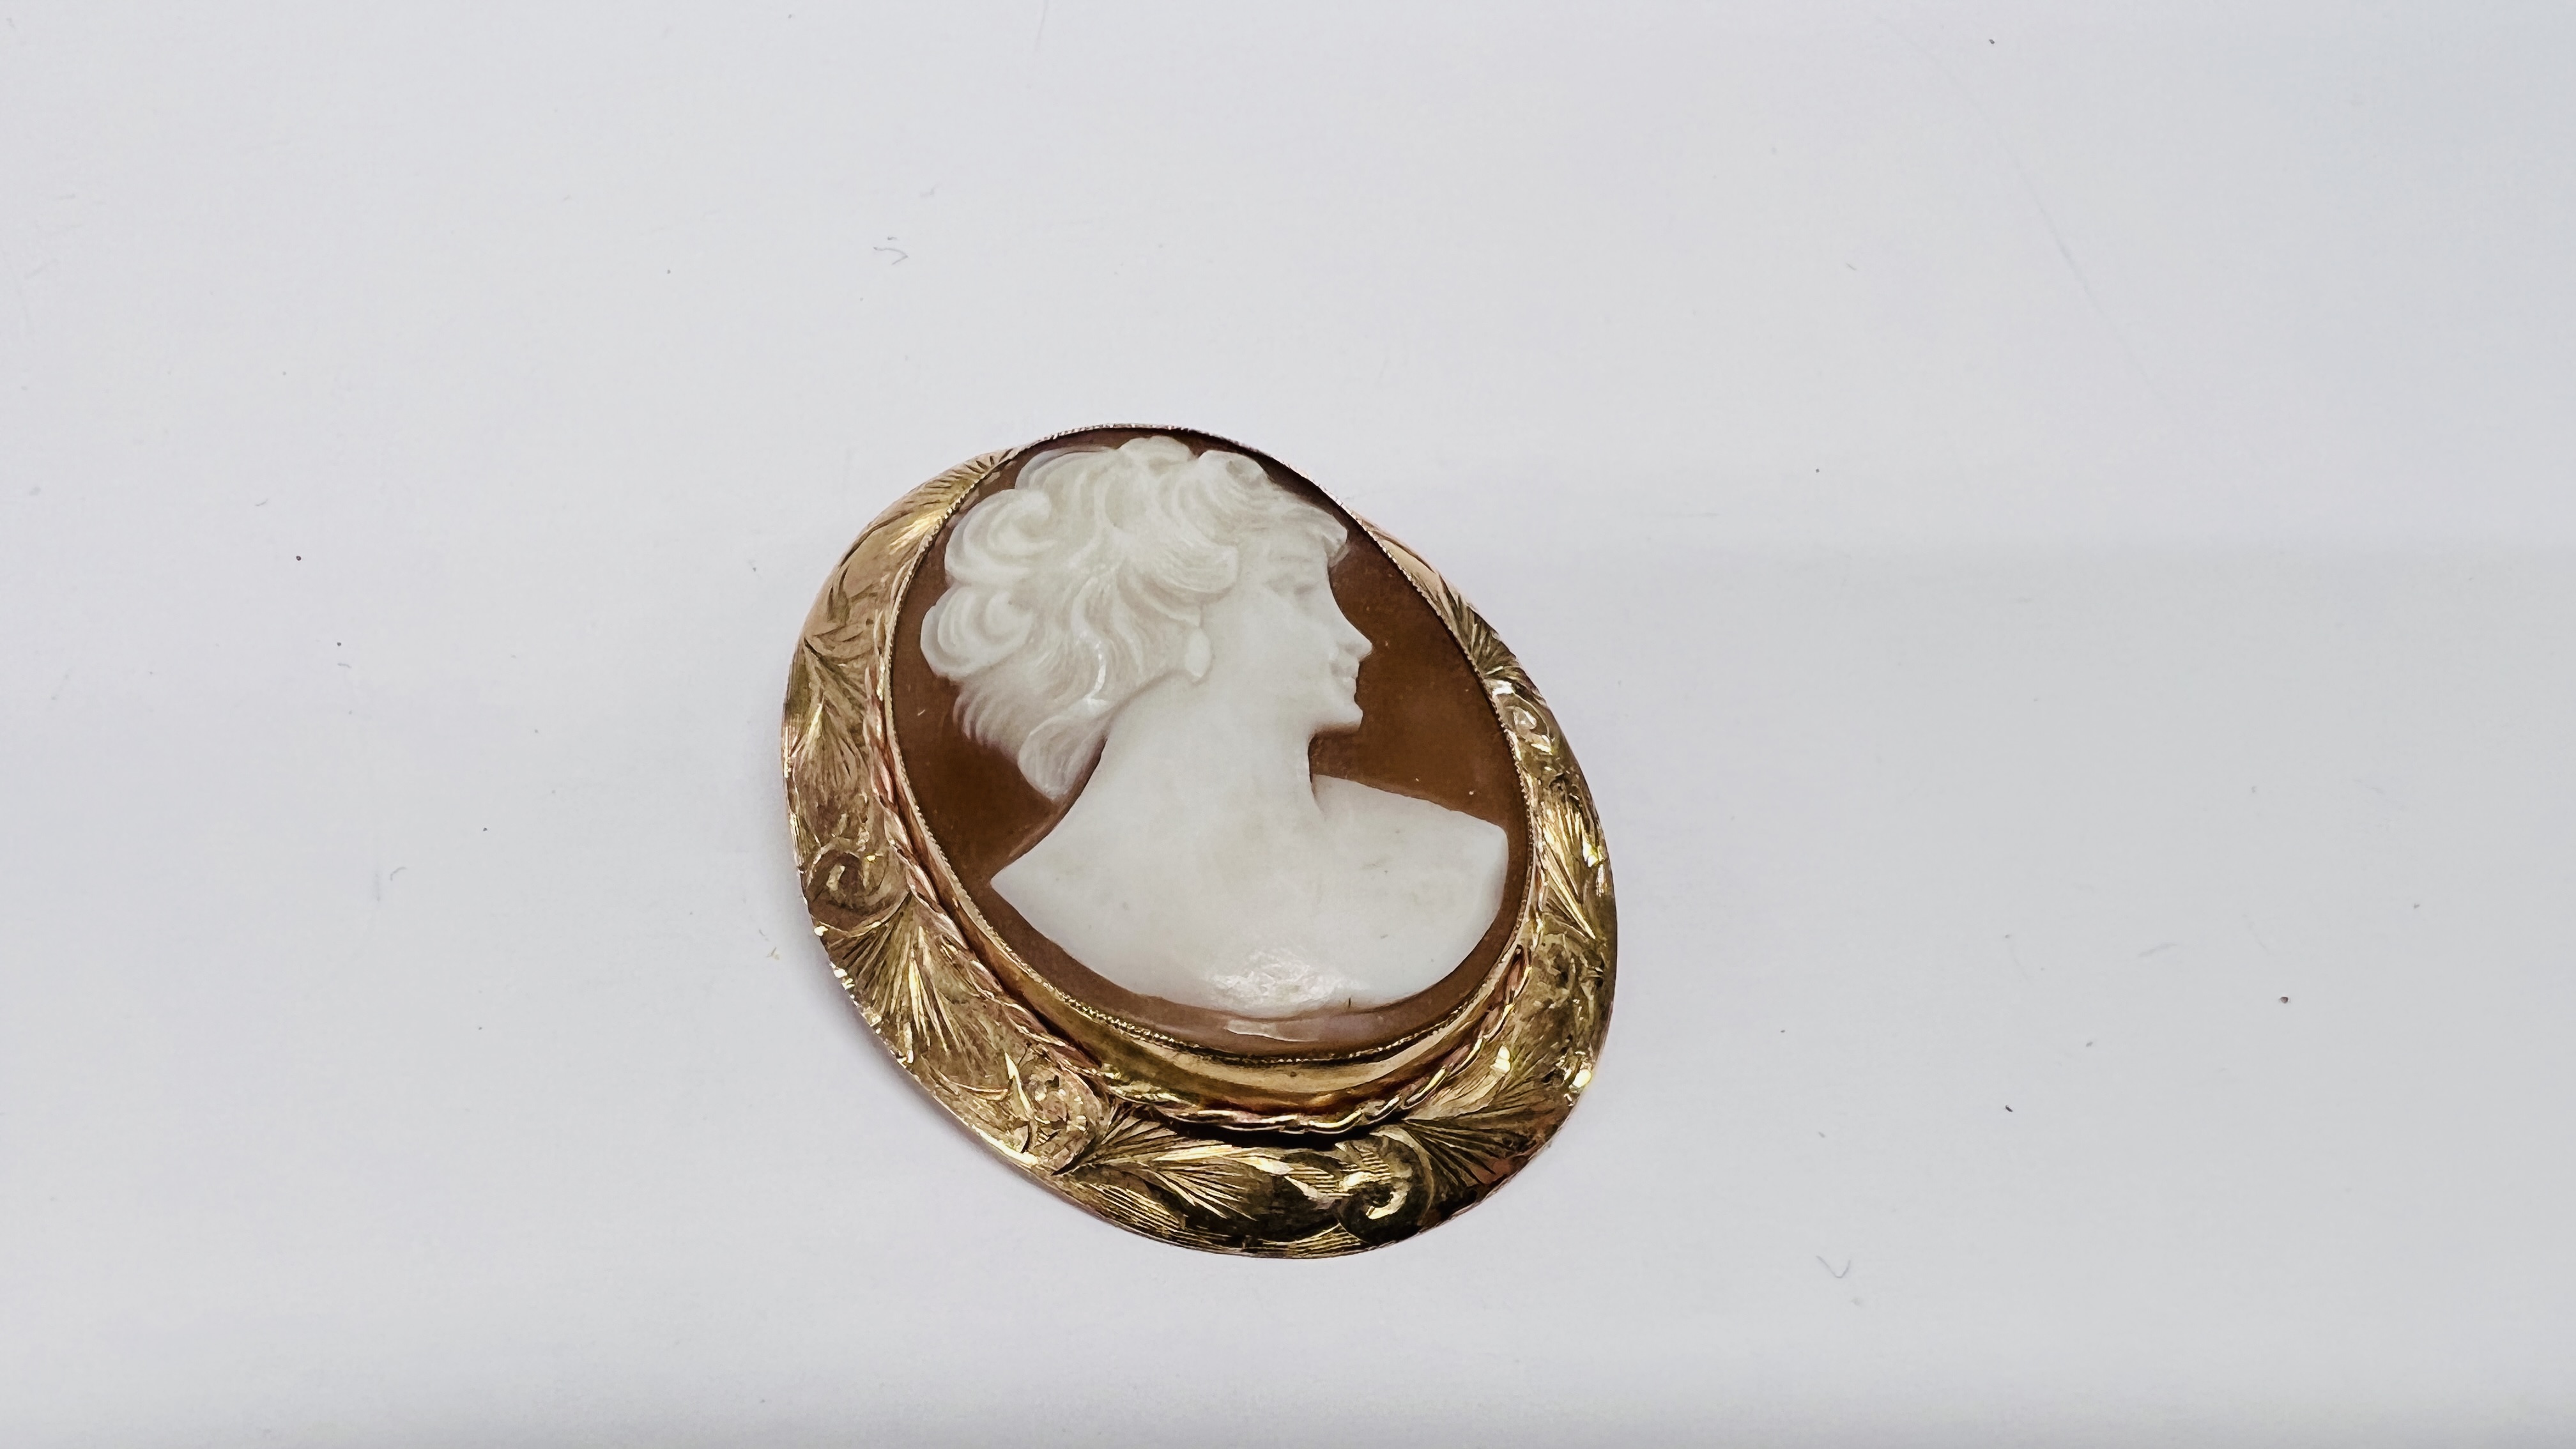 A SHELL CAMEO PENDANT / BROOCH IN 9CT GOLD FRAME.